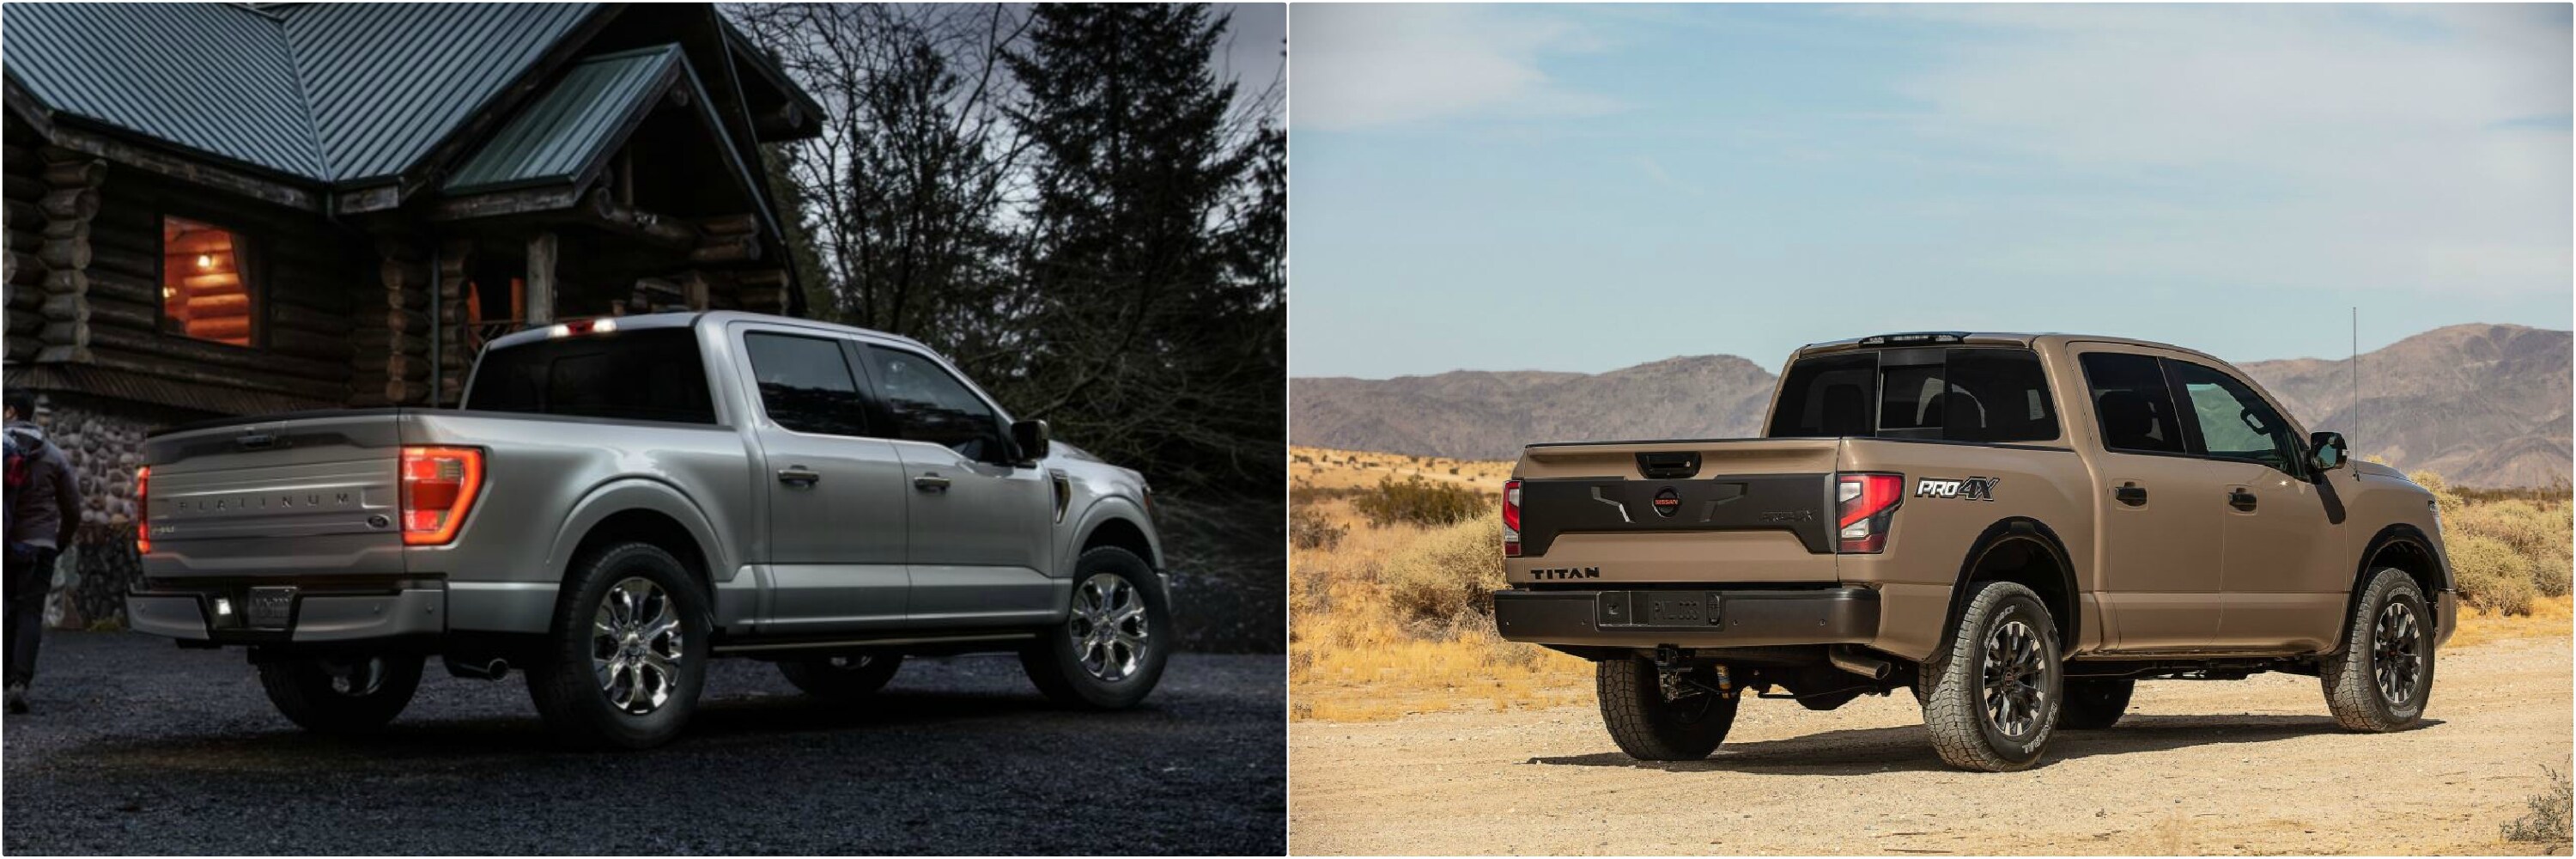 Back view comparison between a new F150 and a Nissan Titan